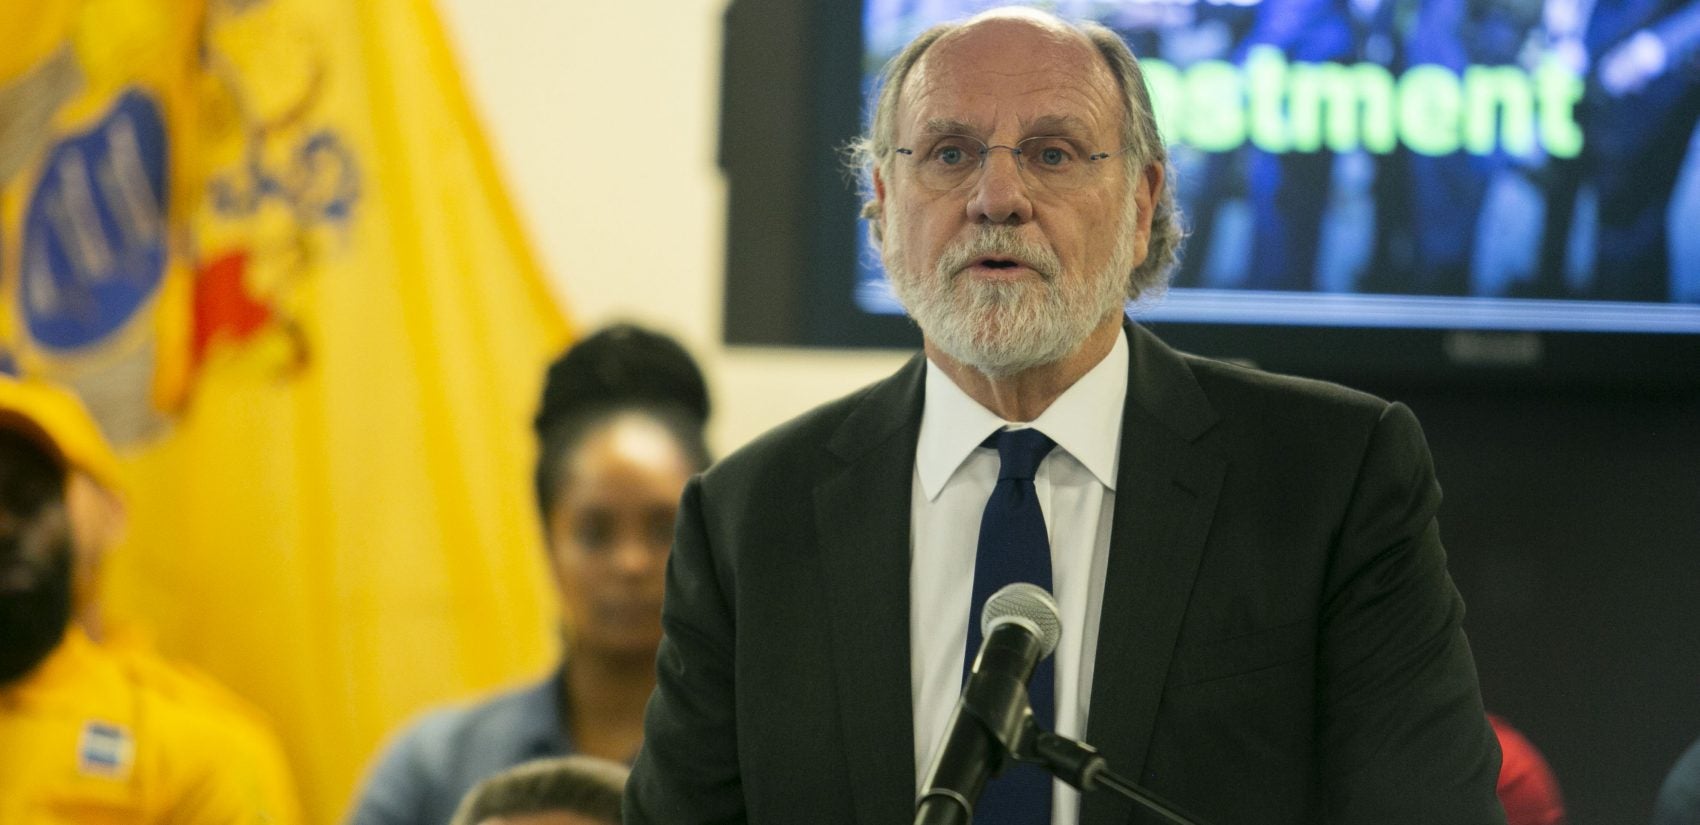 Former New Jersey Gov. Jon Corzine talks about the improvements in Camden Thursday. (Miguel Martinez/WHYY)